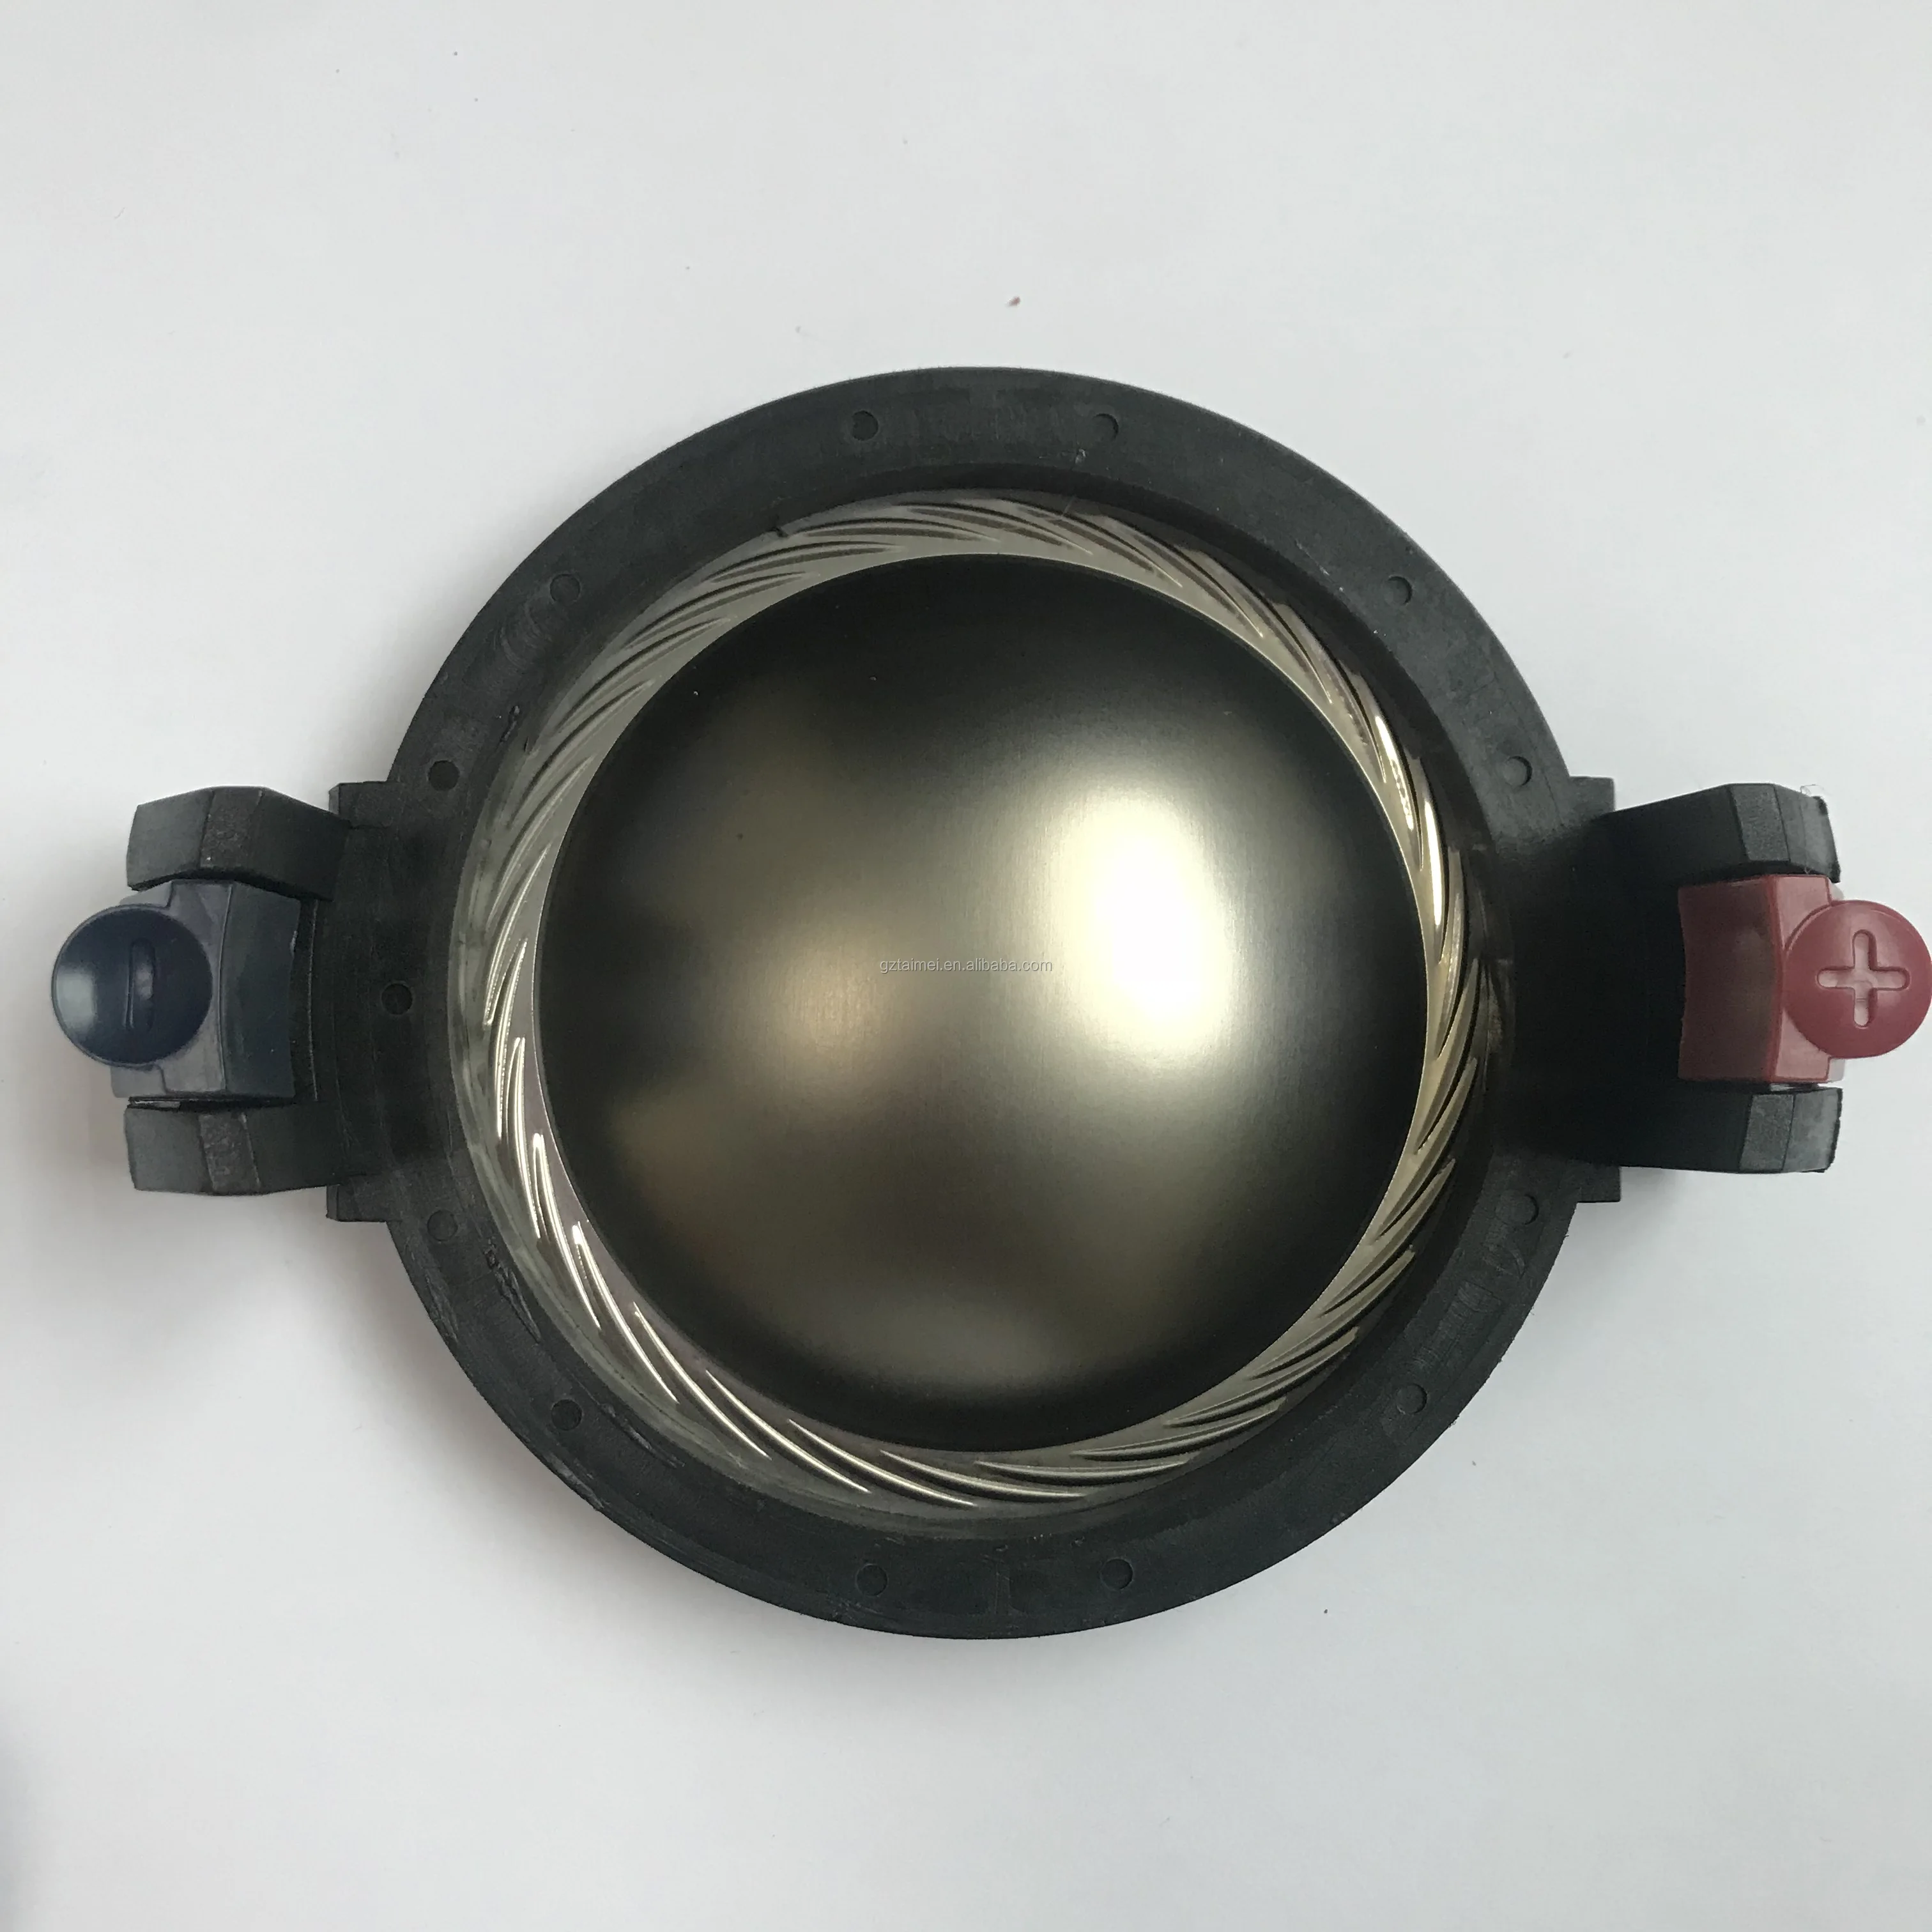 Eaw Kf760 Nd3020 Nd3030 Diaphragm Speaker Component Series Vc 74.5mm - Buy  Diaphragm Rcf Speaker Component,Speaker Diaphragm,Speaker Voice Coil  Product on Alibaba.com